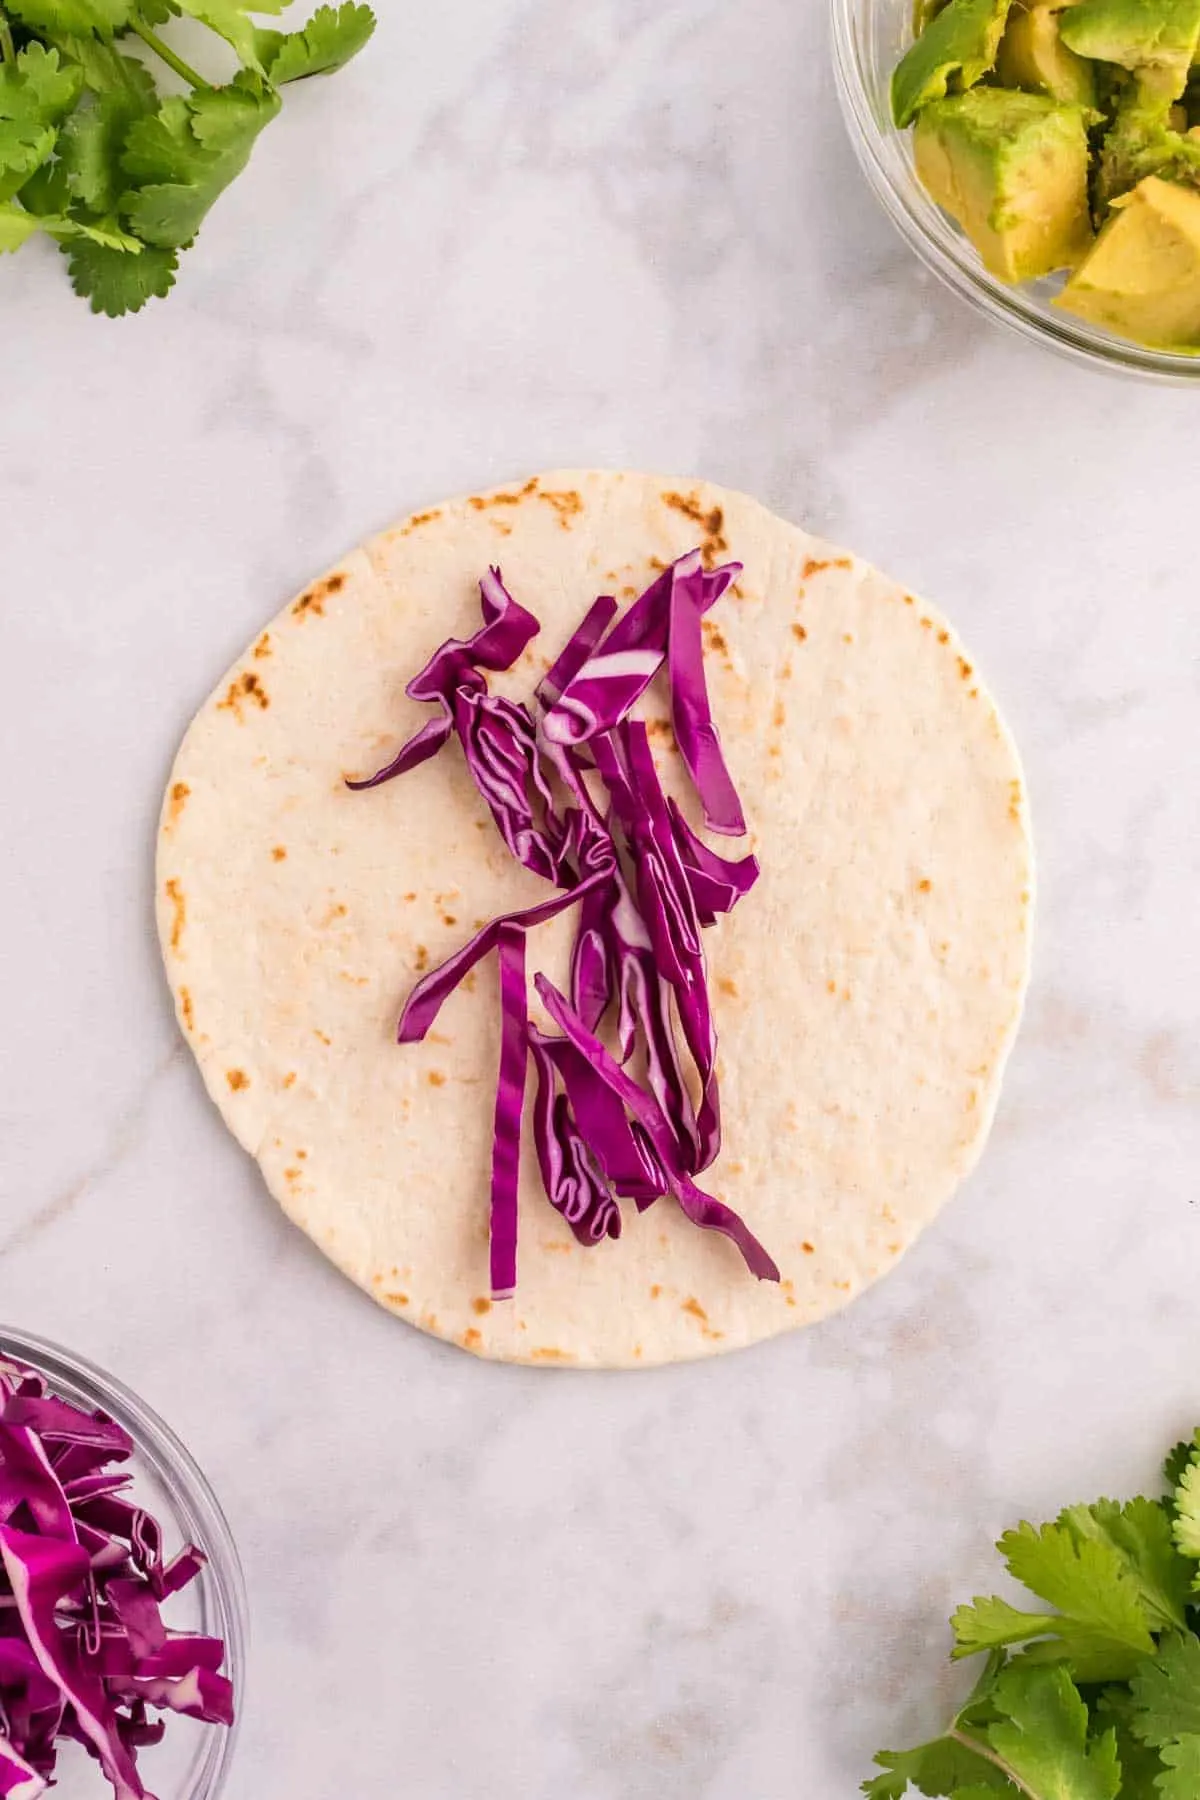 sliced red cabbage on a flour tortilla